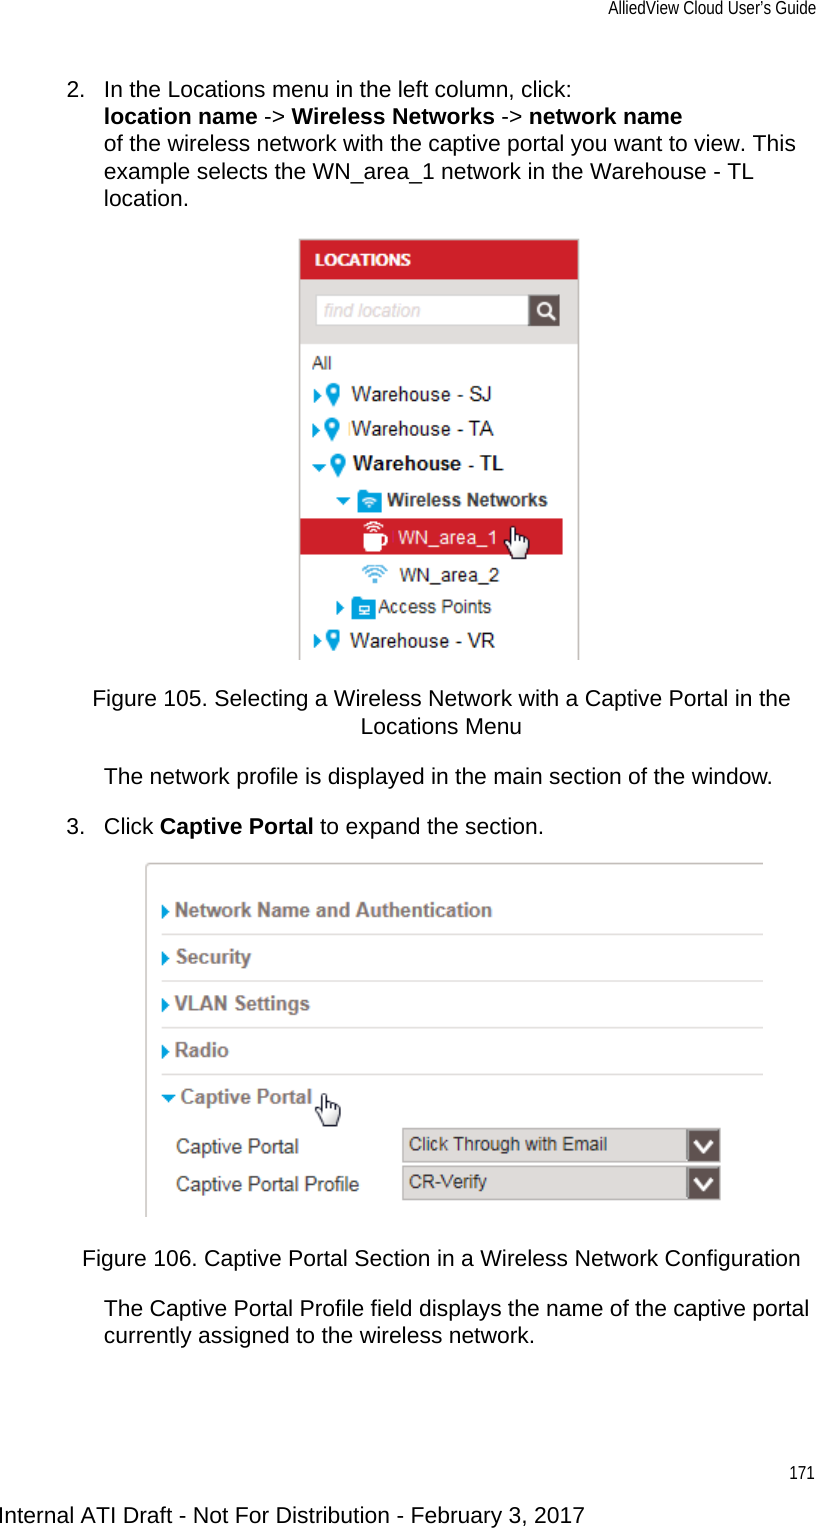 AlliedView Cloud User’s Guide1712. In the Locations menu in the left column, click:location name -&gt; Wireless Networks -&gt; network nameof the wireless network with the captive portal you want to view. This example selects the WN_area_1 network in the Warehouse - TL location.Figure 105. Selecting a Wireless Network with a Captive Portal in the Locations MenuThe network profile is displayed in the main section of the window.3. Click Captive Portal to expand the section.Figure 106. Captive Portal Section in a Wireless Network ConfigurationThe Captive Portal Profile field displays the name of the captive portal currently assigned to the wireless network.Internal ATI Draft - Not For Distribution - February 3, 2017